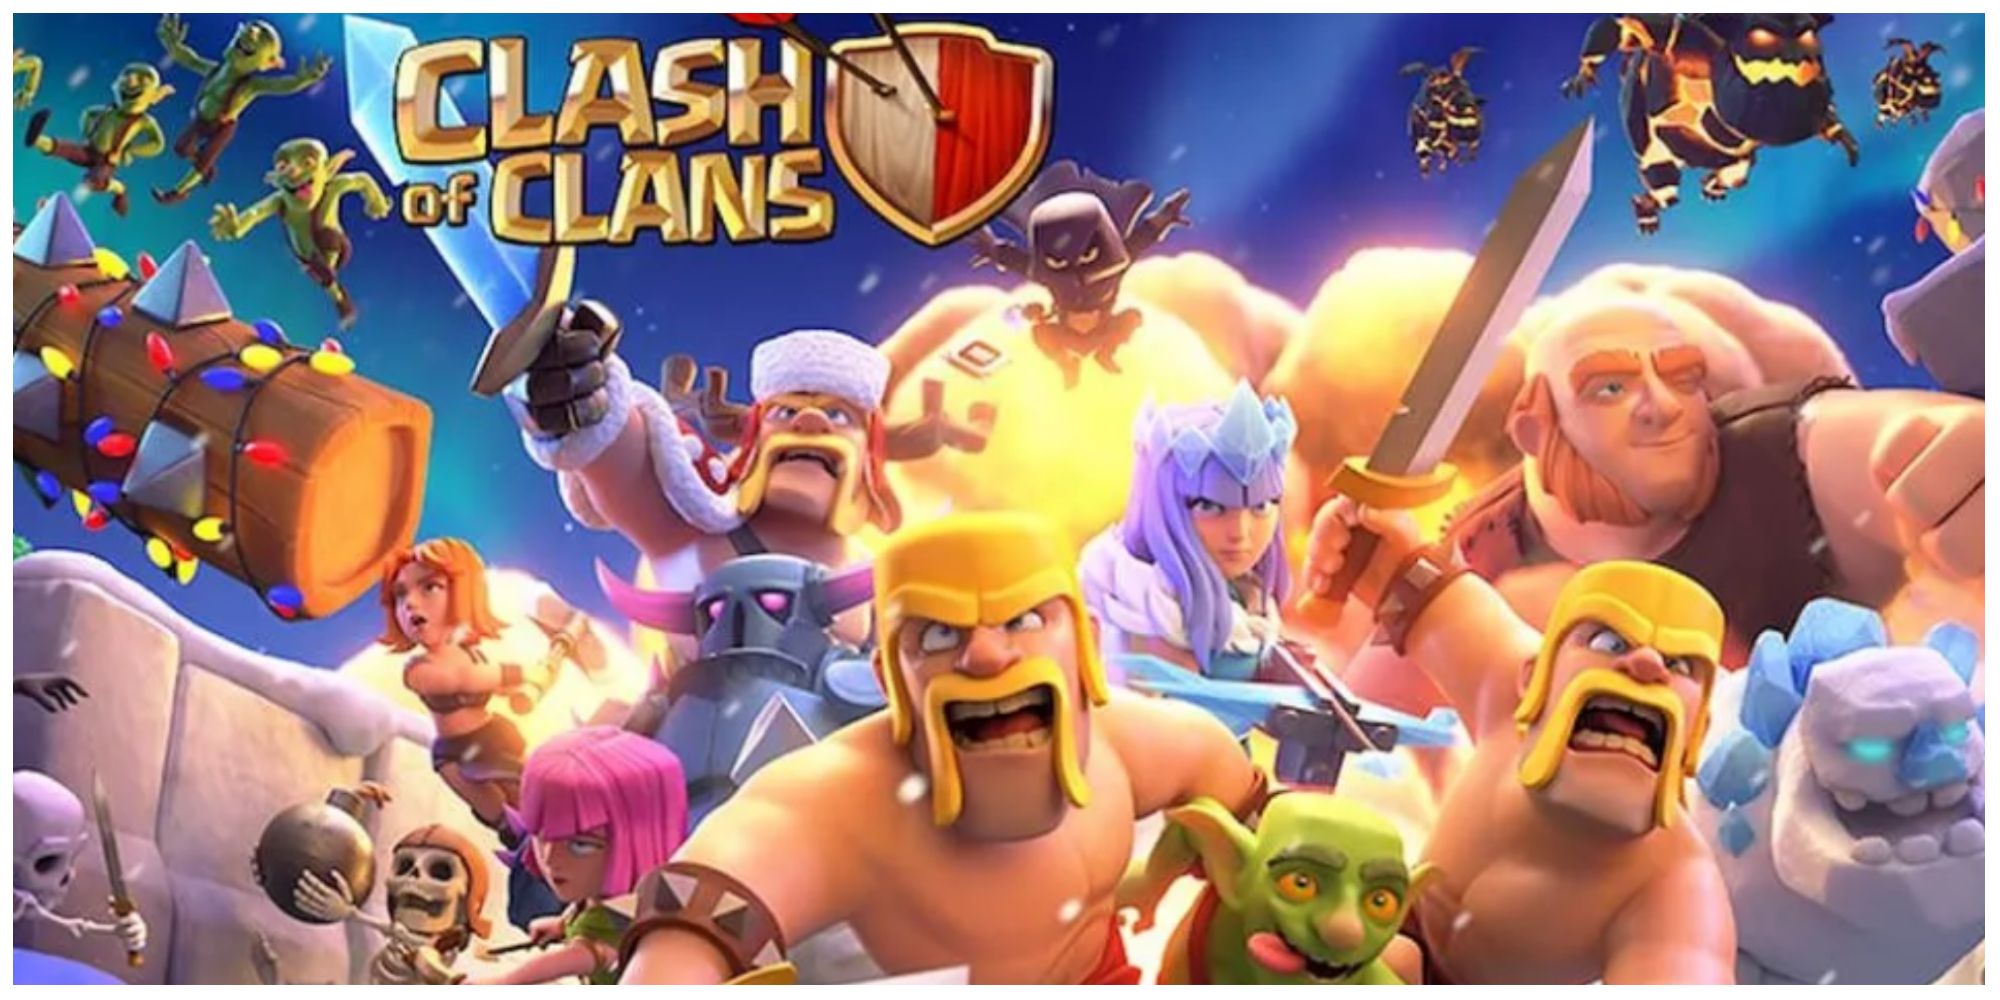 A fight In Clash of Clans